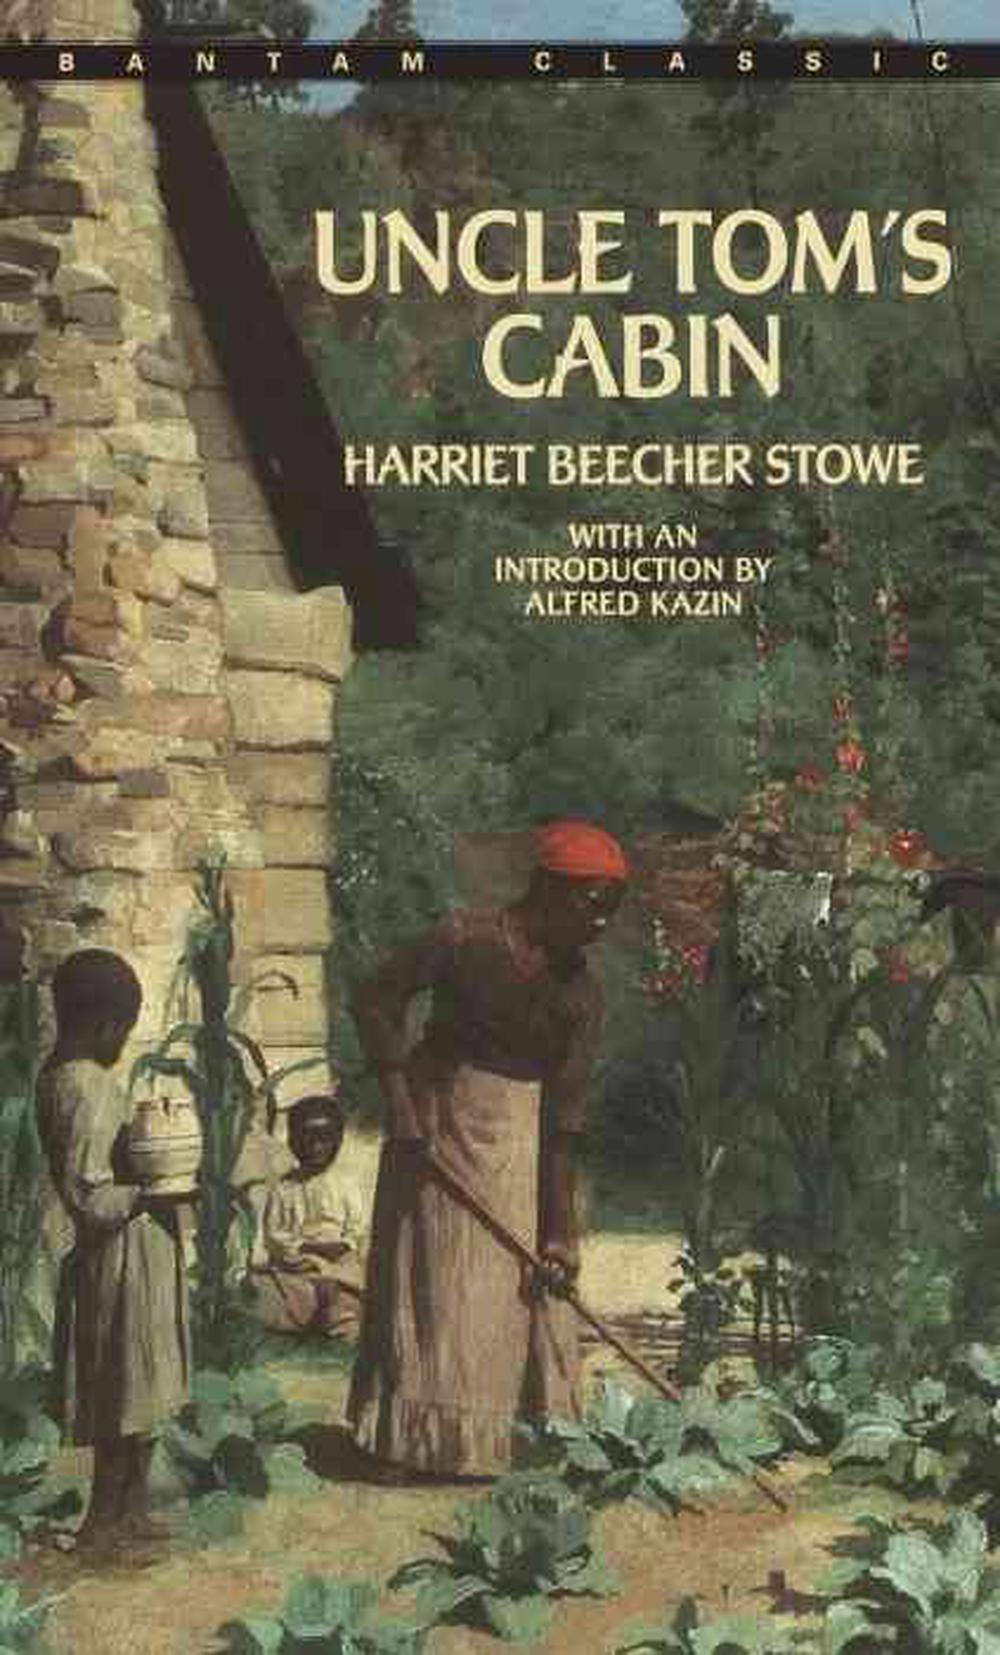 book review on uncle tom's cabin